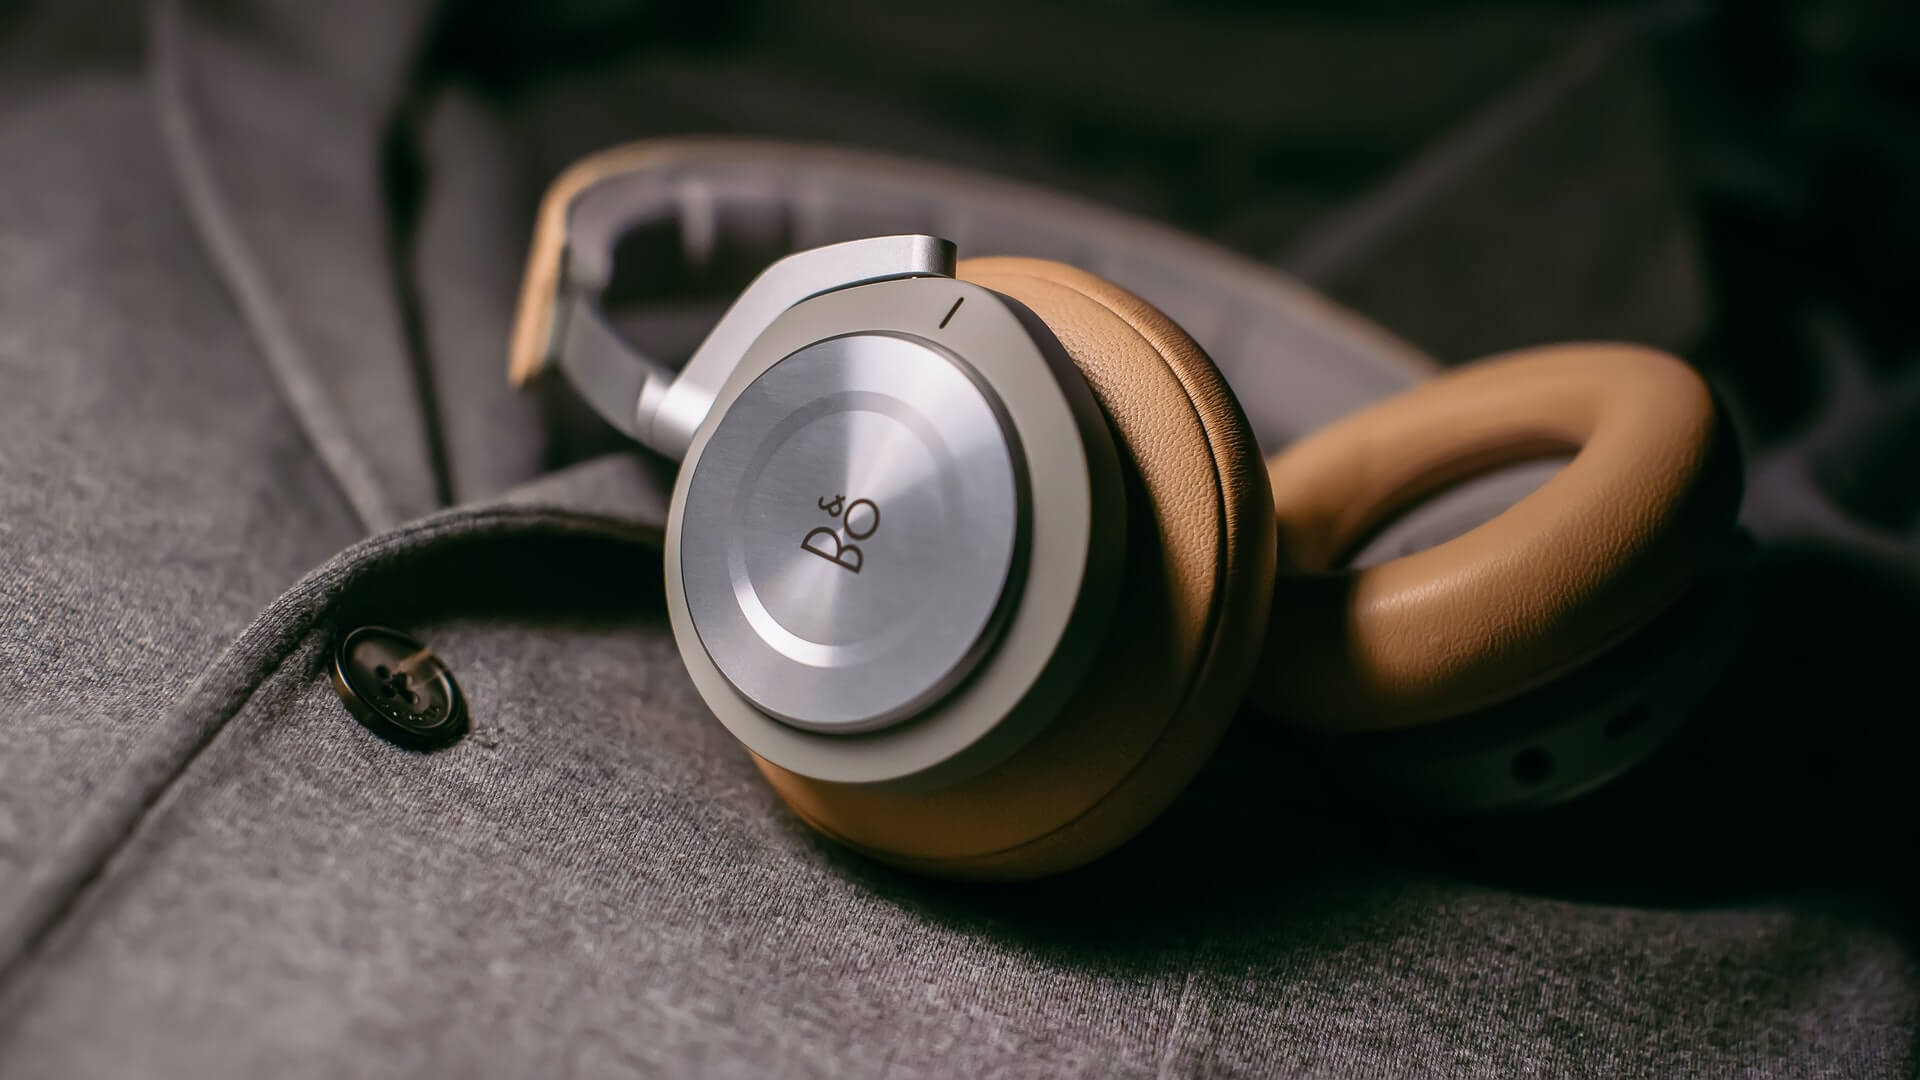 Best High-end Noise Cancelling Headphones: Bang & Olufsen Beoplay H9 3rd Gen